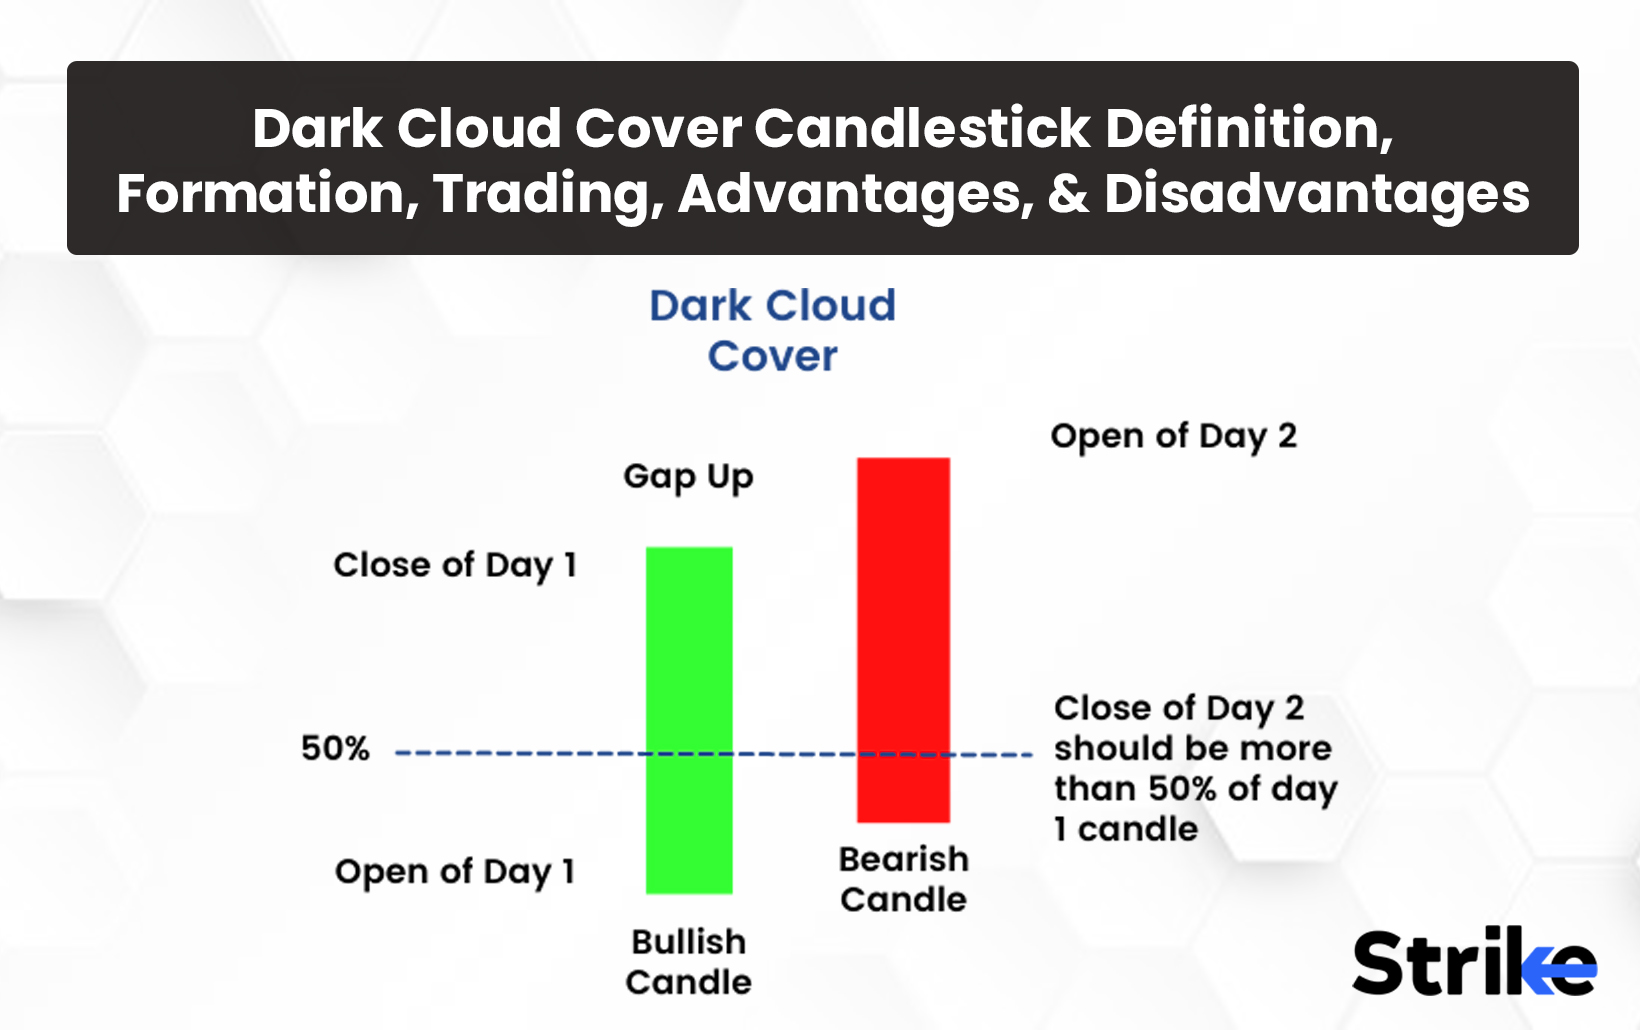 Dark Cloud Cover Candlestick: Definition, Formation, Trading, Advantages, and Disadvantages